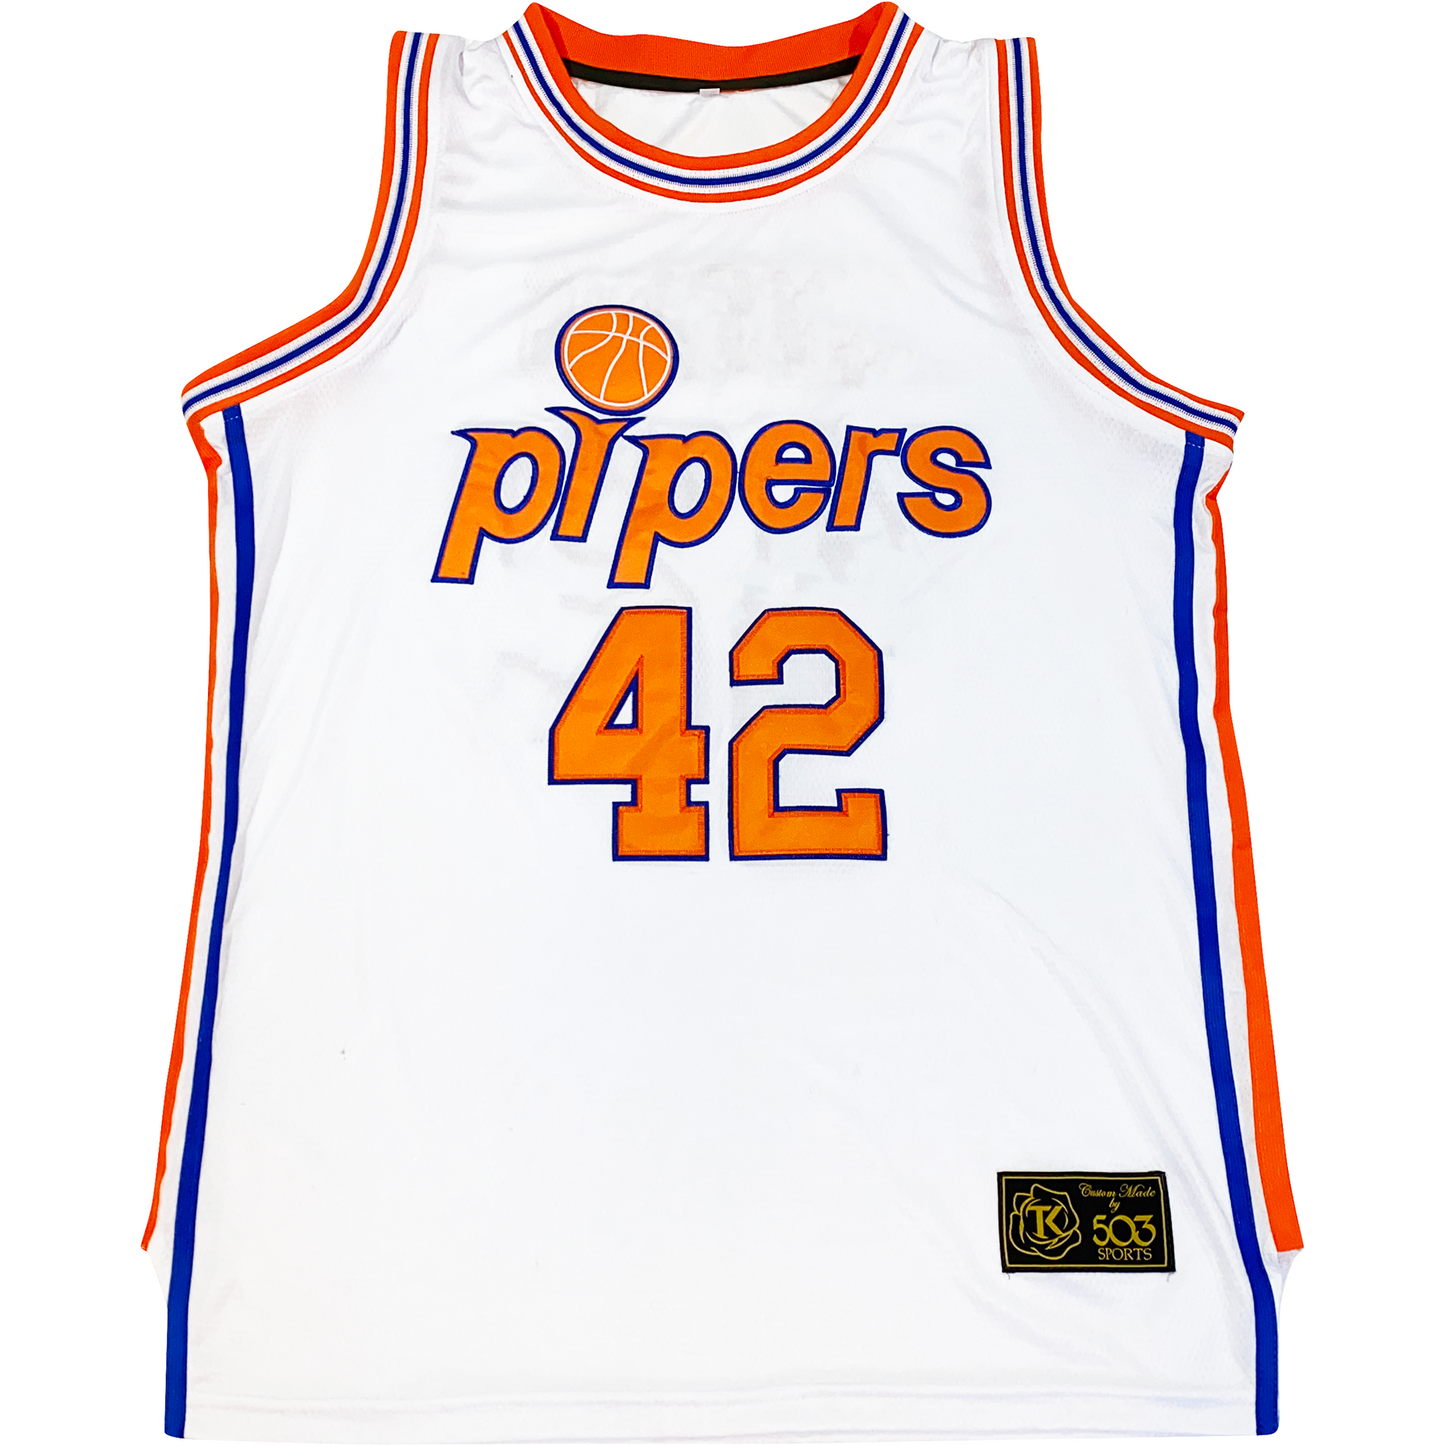 connie hawkins pittsburgh pipers jersey